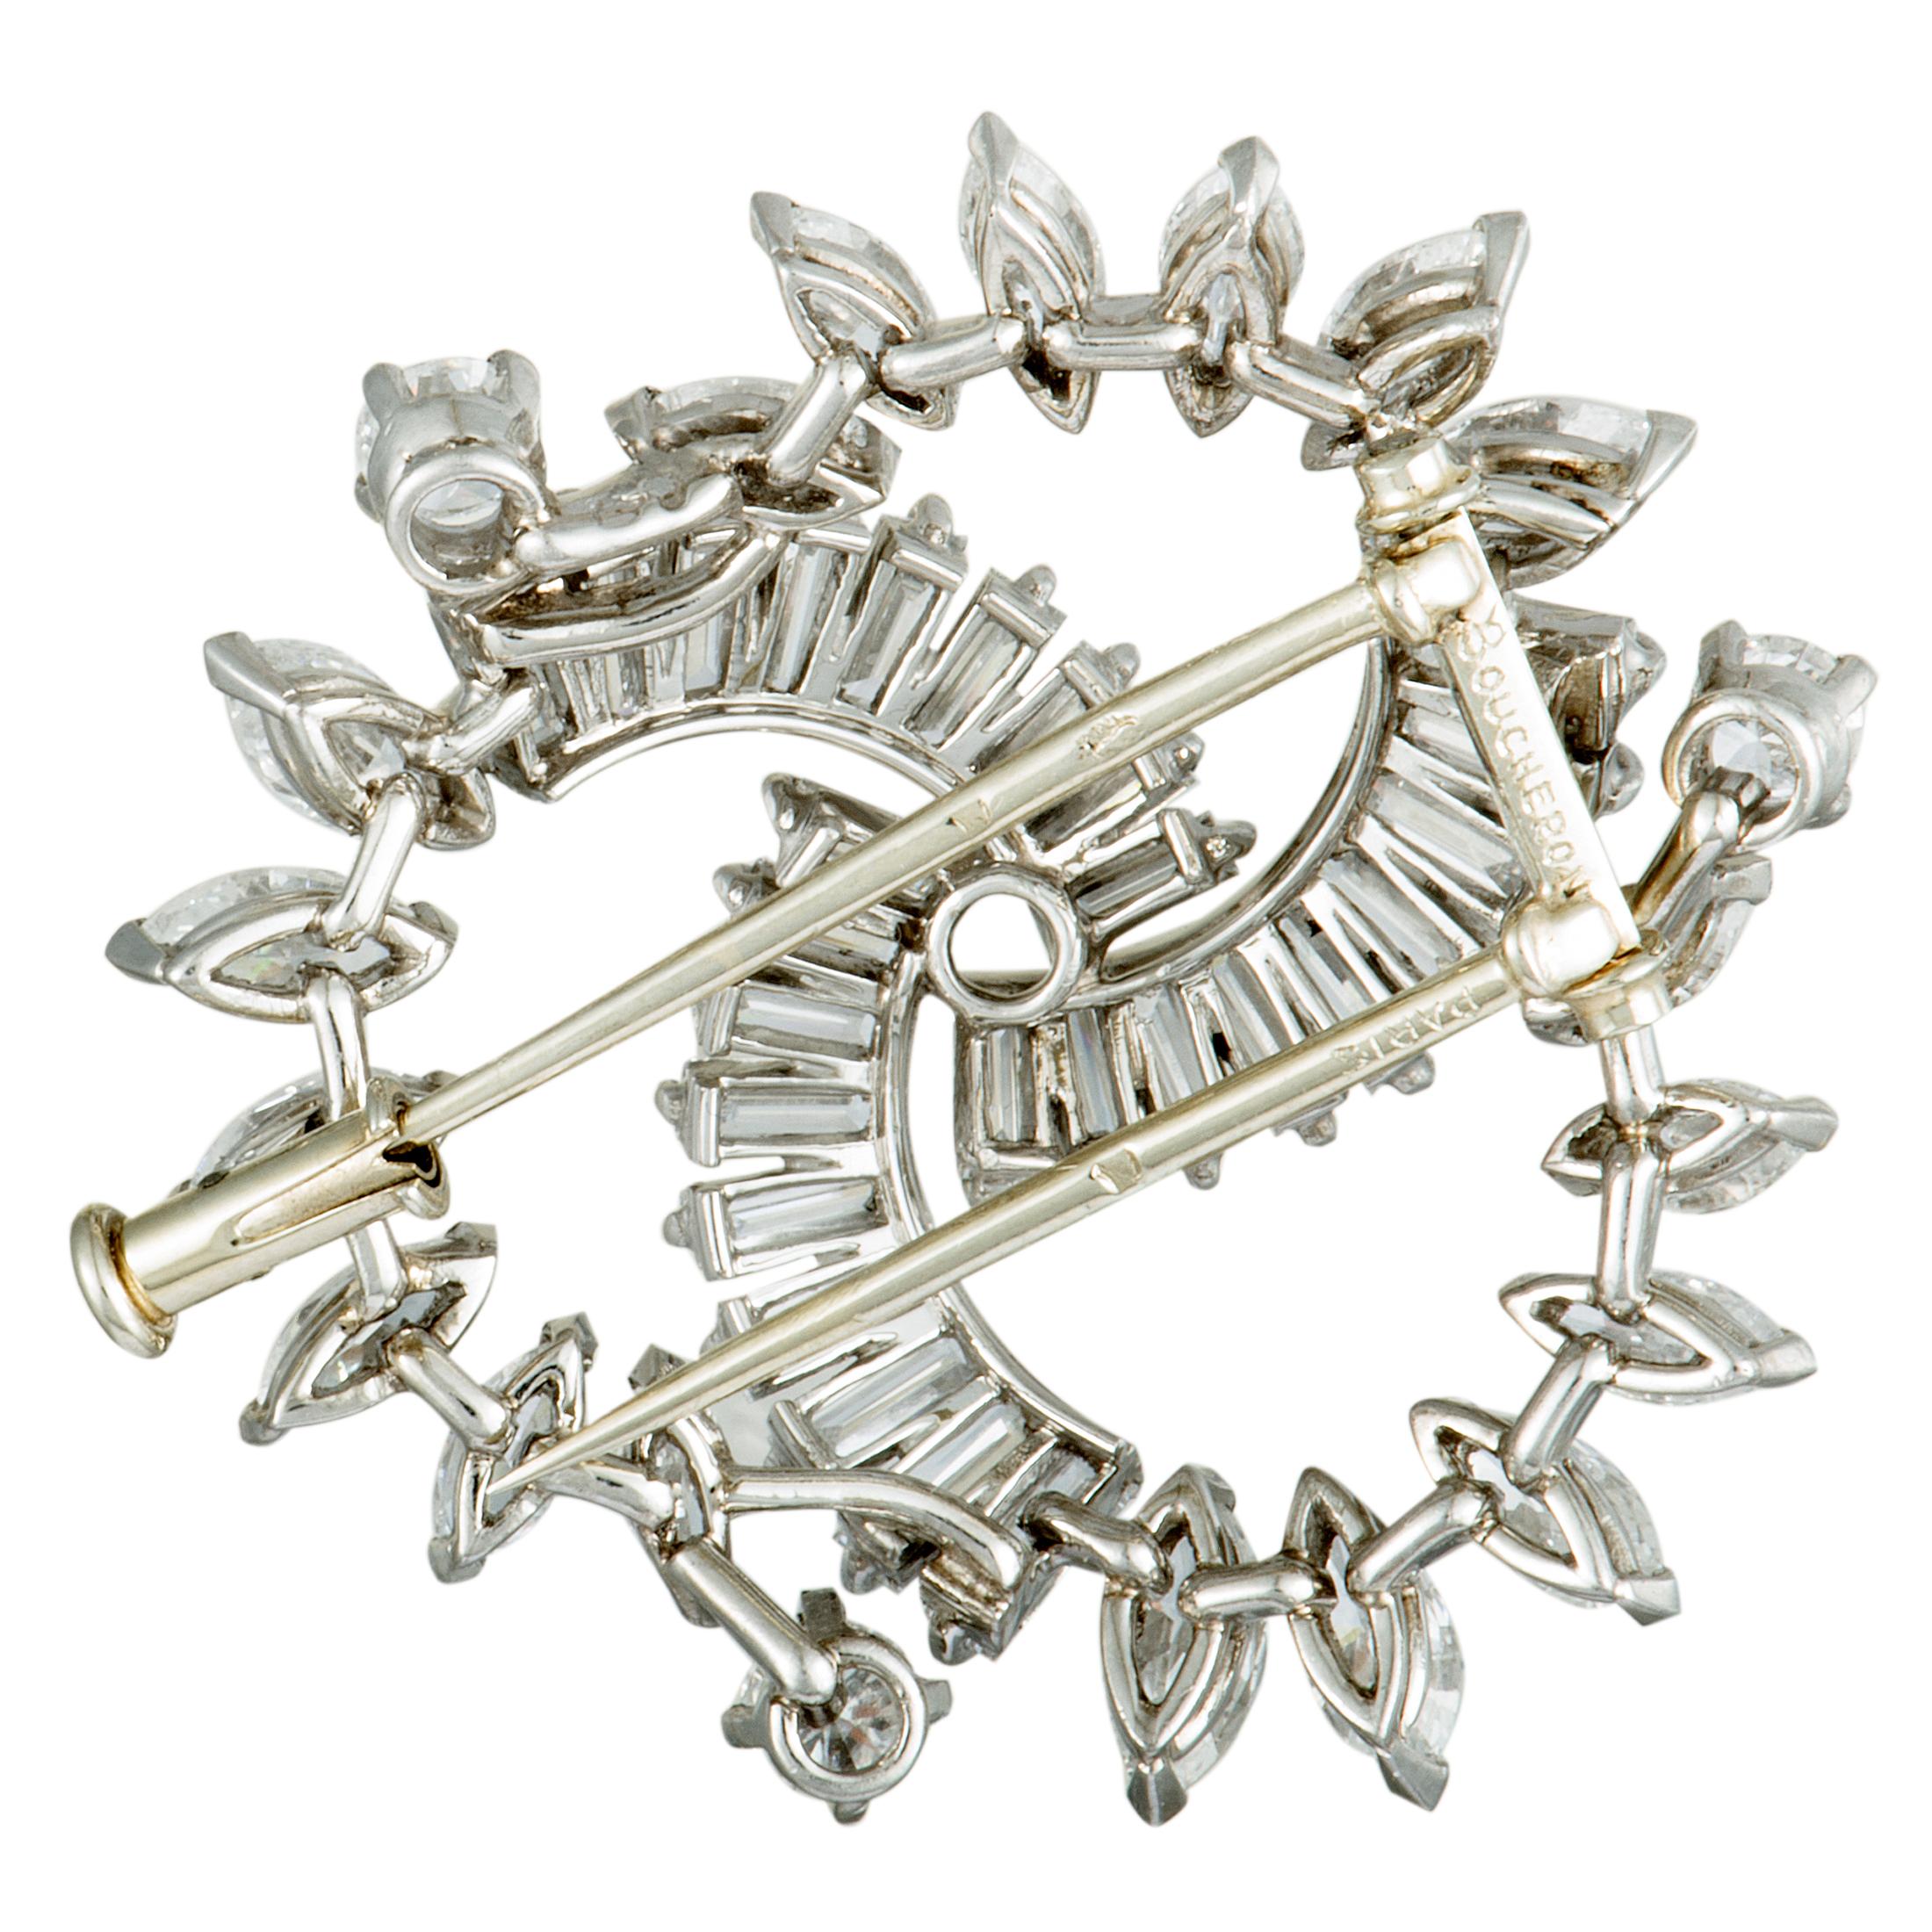 Elevate your style in a most extravagant manner with this fascinating vintage piece that is splendidly designed by Boucheron and wonderfully crafted from luxurious platinum. The brooch is embellished with a plethora of expertly cut, colorless (grade